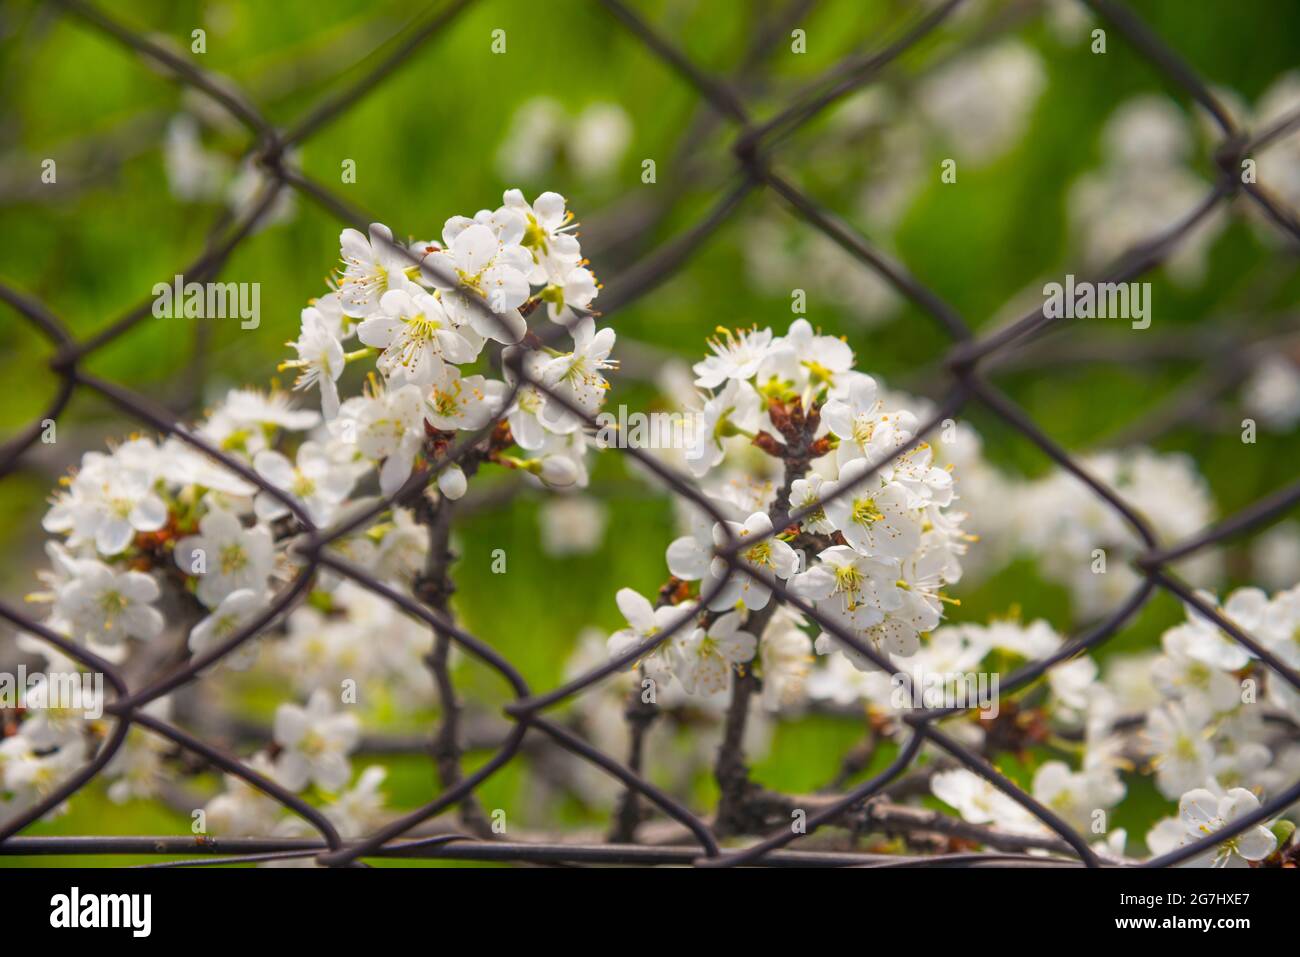 White flowers behind a wire fence. Stock Photo